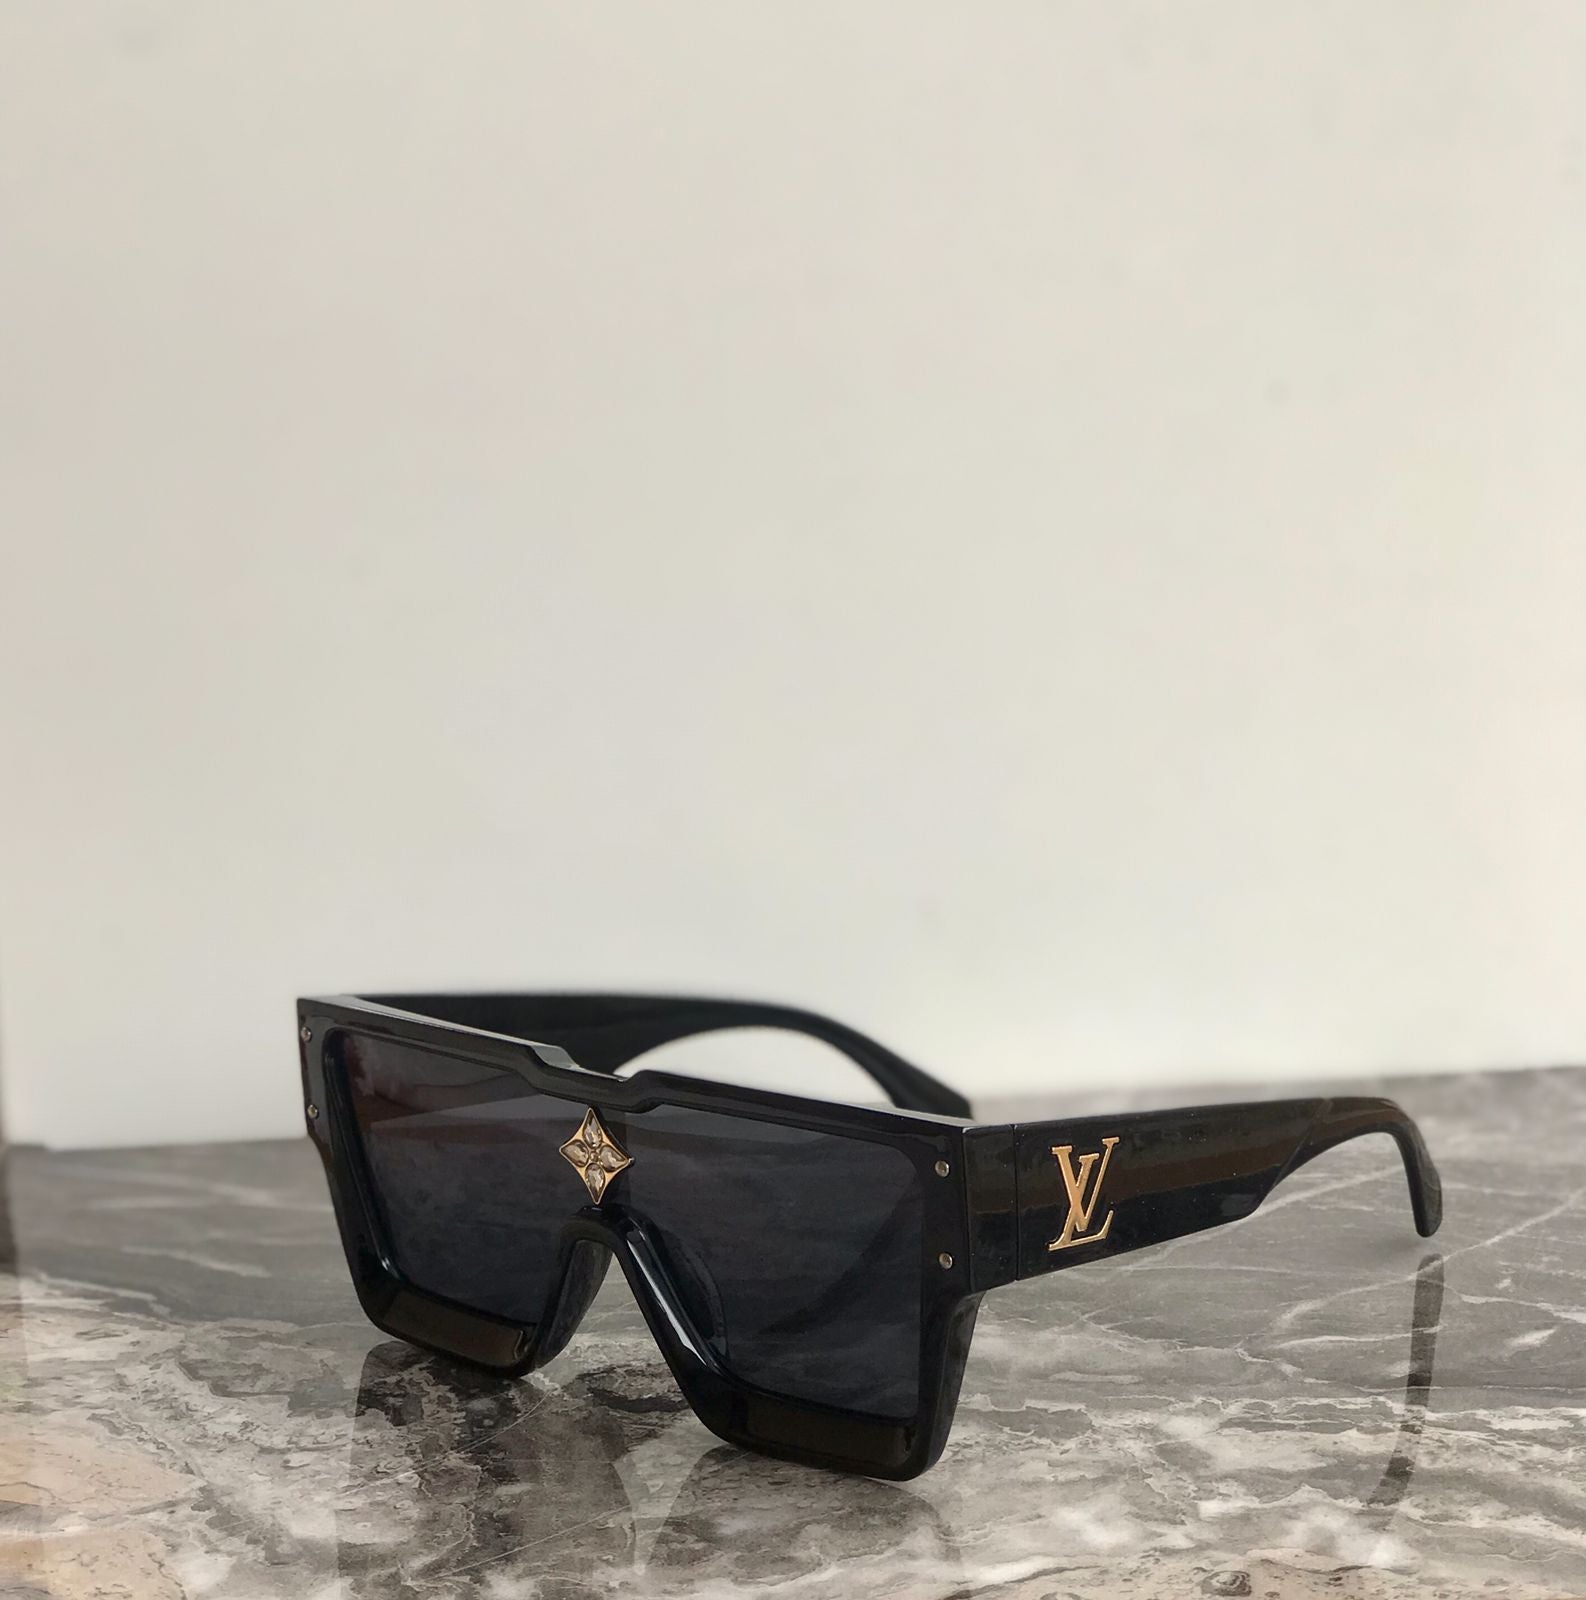 Lv Cyclone 2 Best Price In Pakistan, Rs 3000